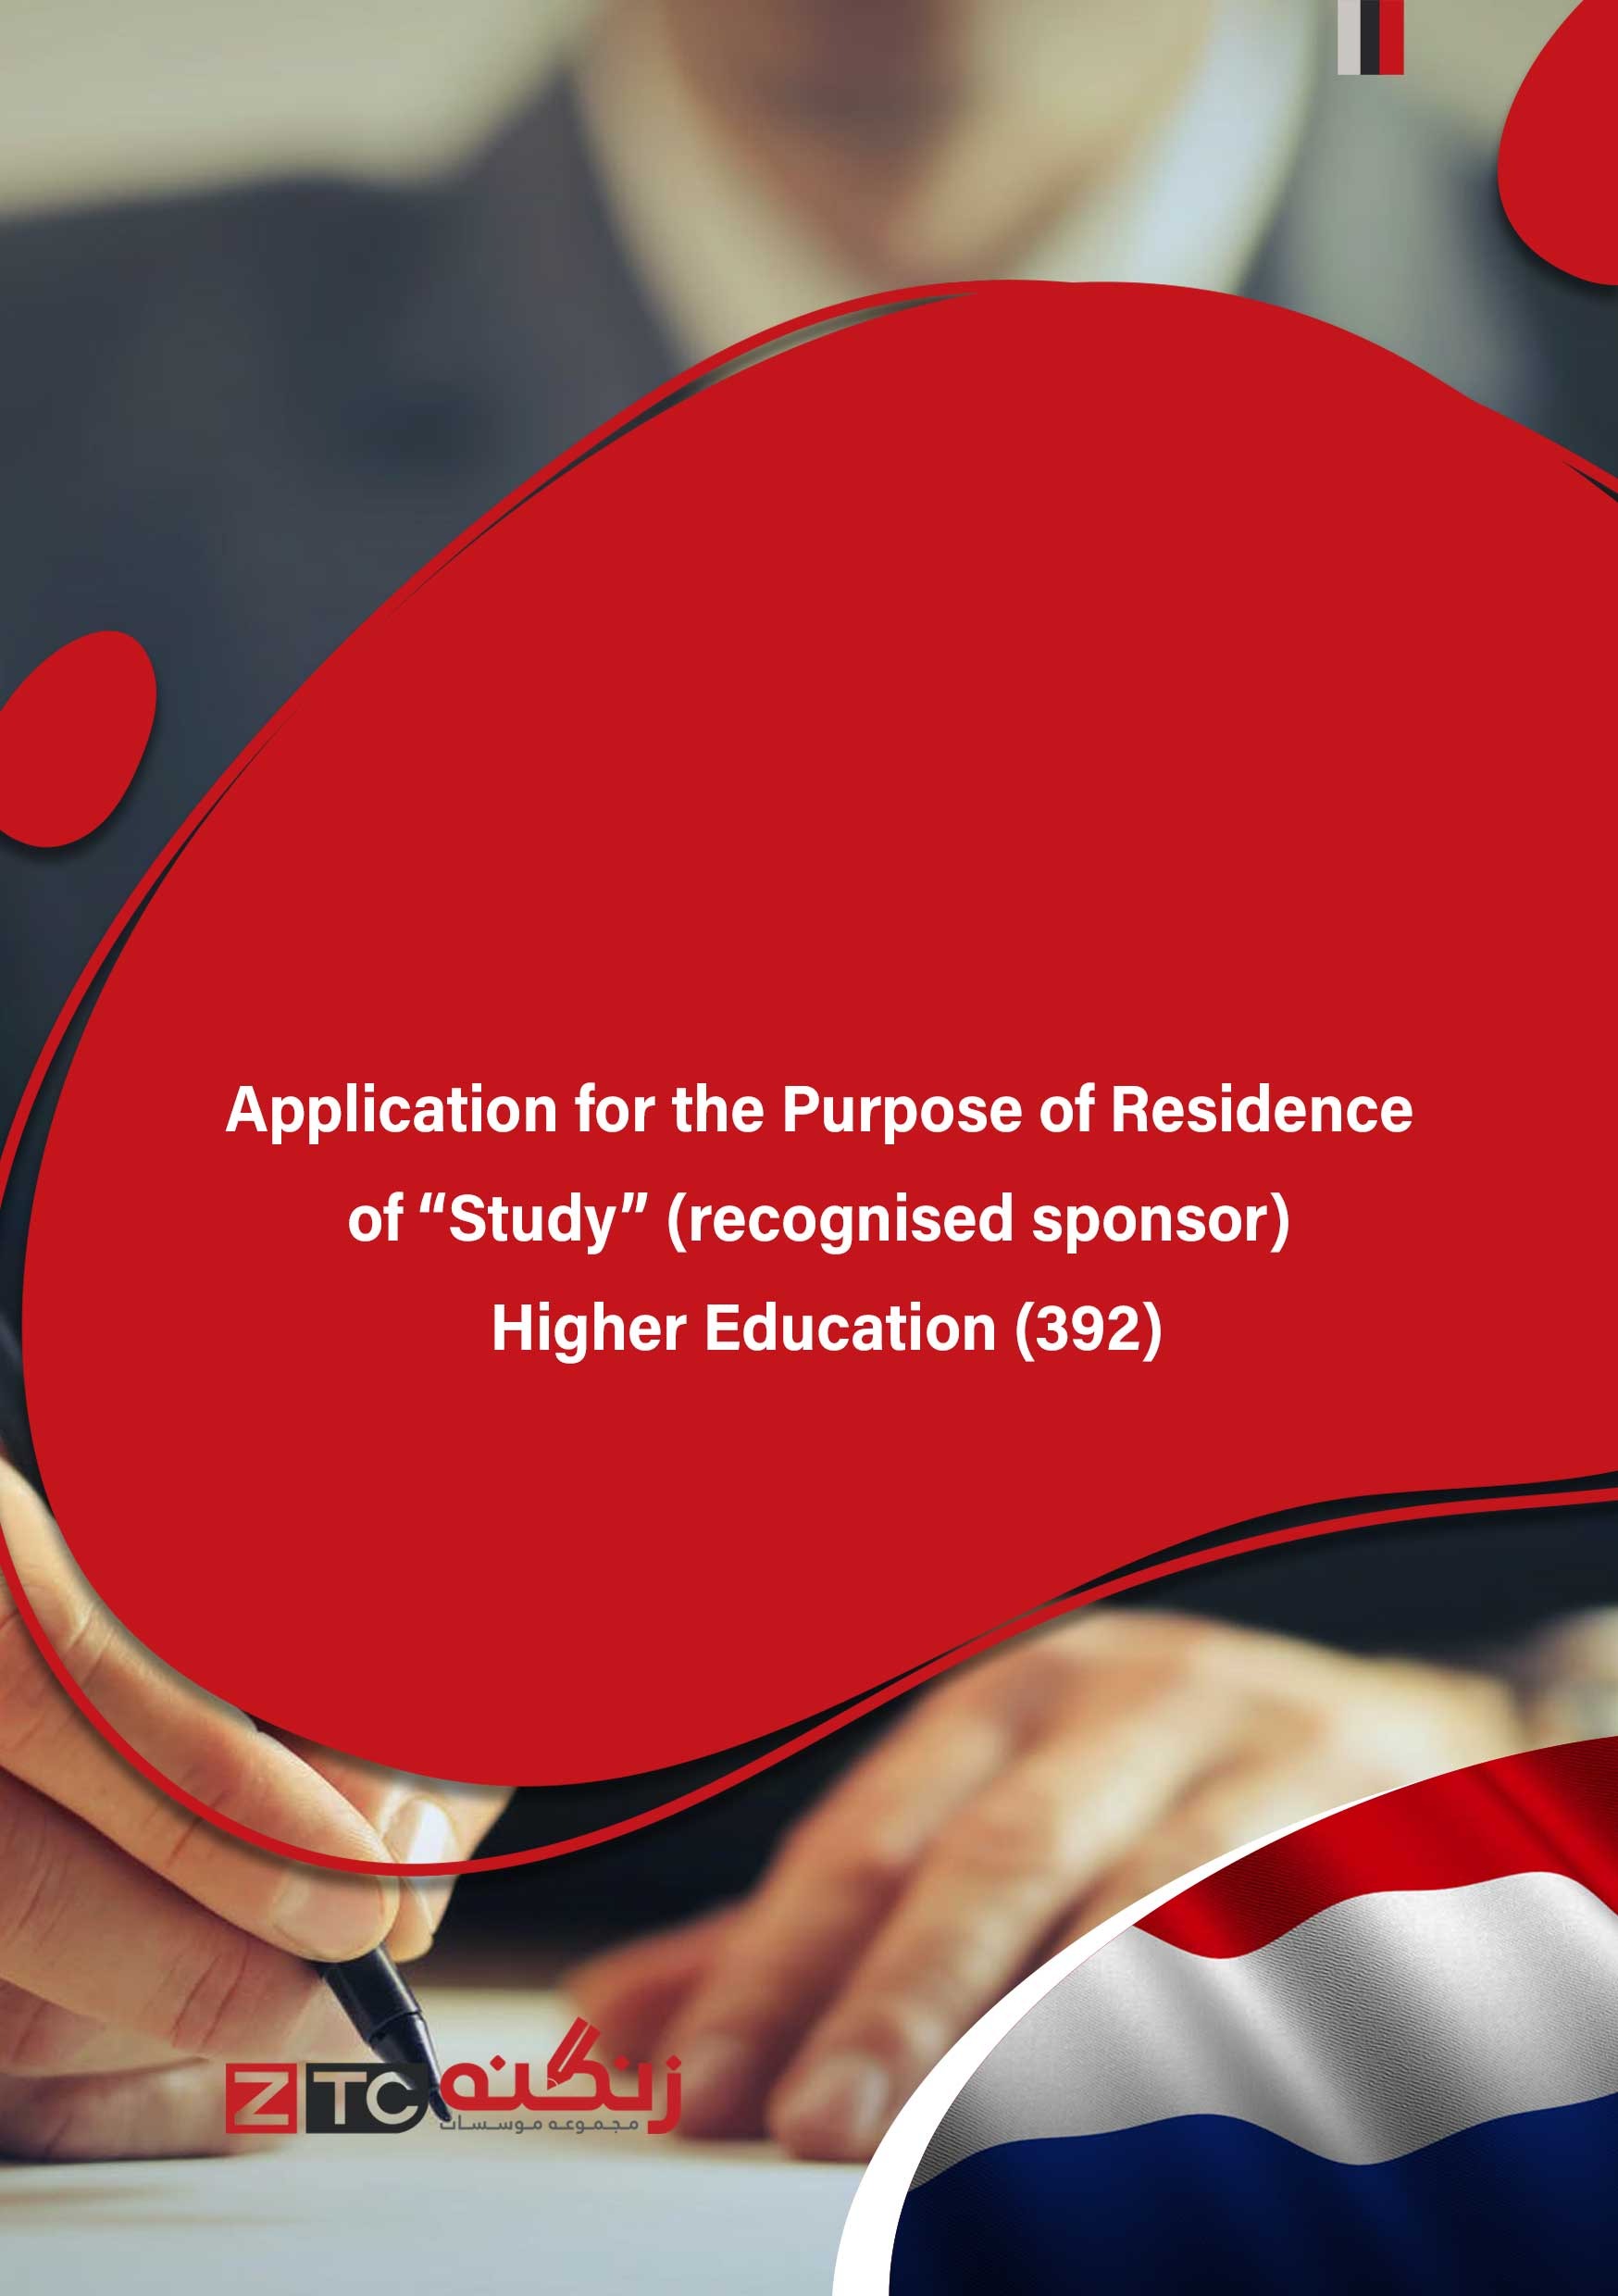 Application for the Purpose of Residence of “Study” (recognised sponsor) Higher Education (392)